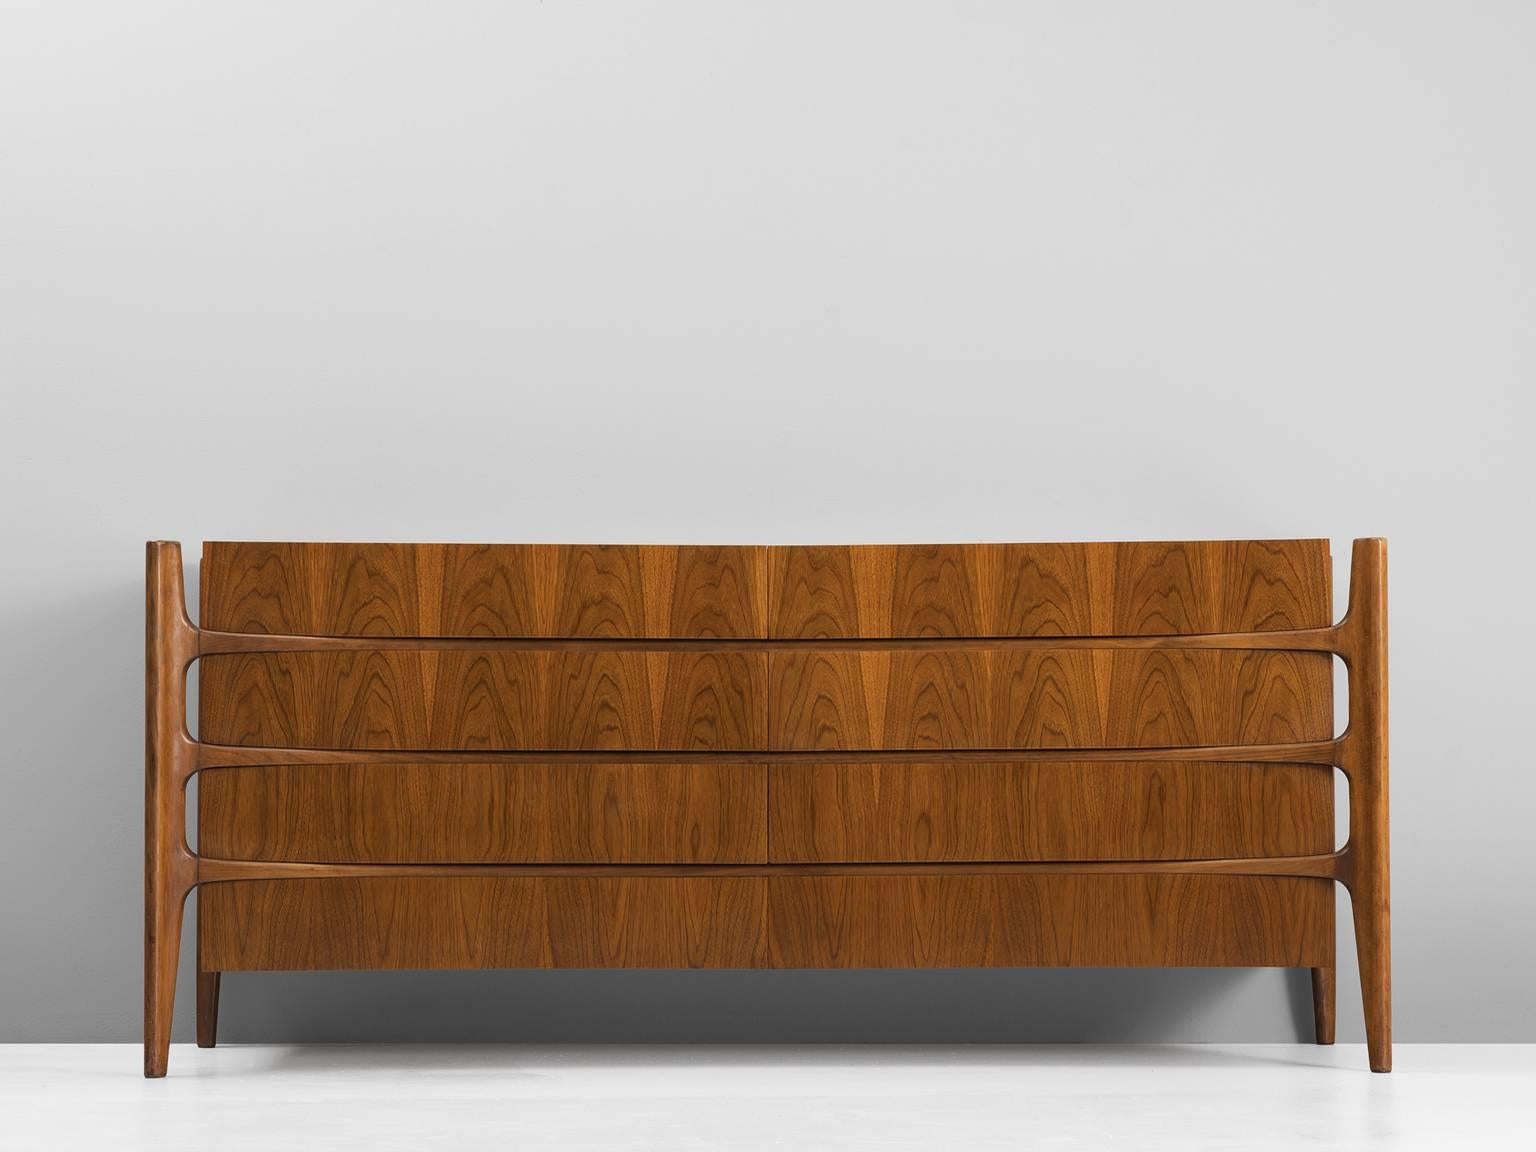 Sideboard, in walnut by and documented: William Hinn for Urban Furniture Company, Sweden, 1950s.

Beautiful curved double dresser. This credenza shows an exquisite organic and amorph design. The wooden frame reminds of a skeleton, the large set of